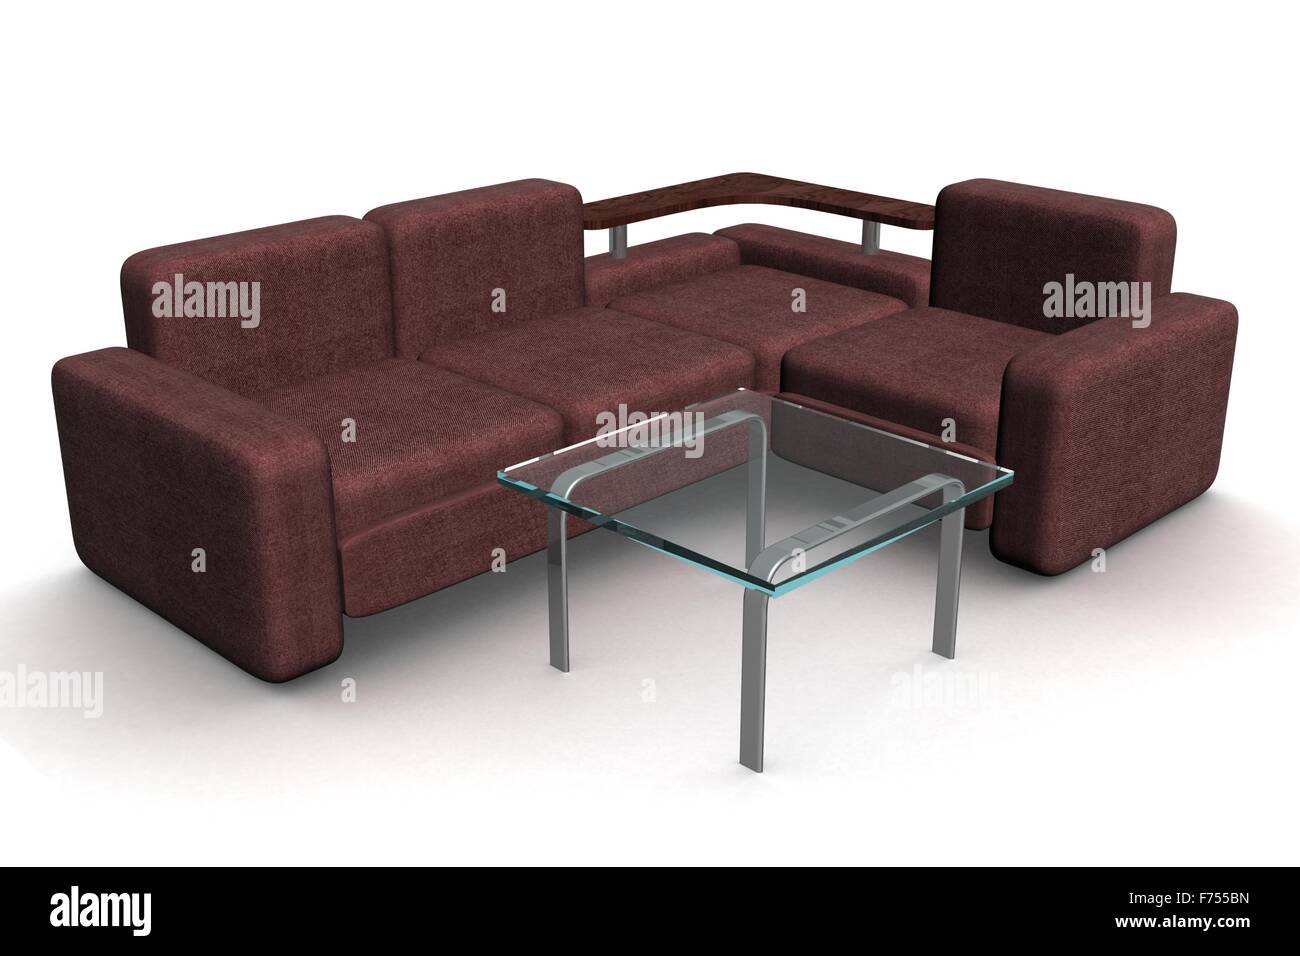 Sofa and glass little table. 3D illustrations. Stock Photo